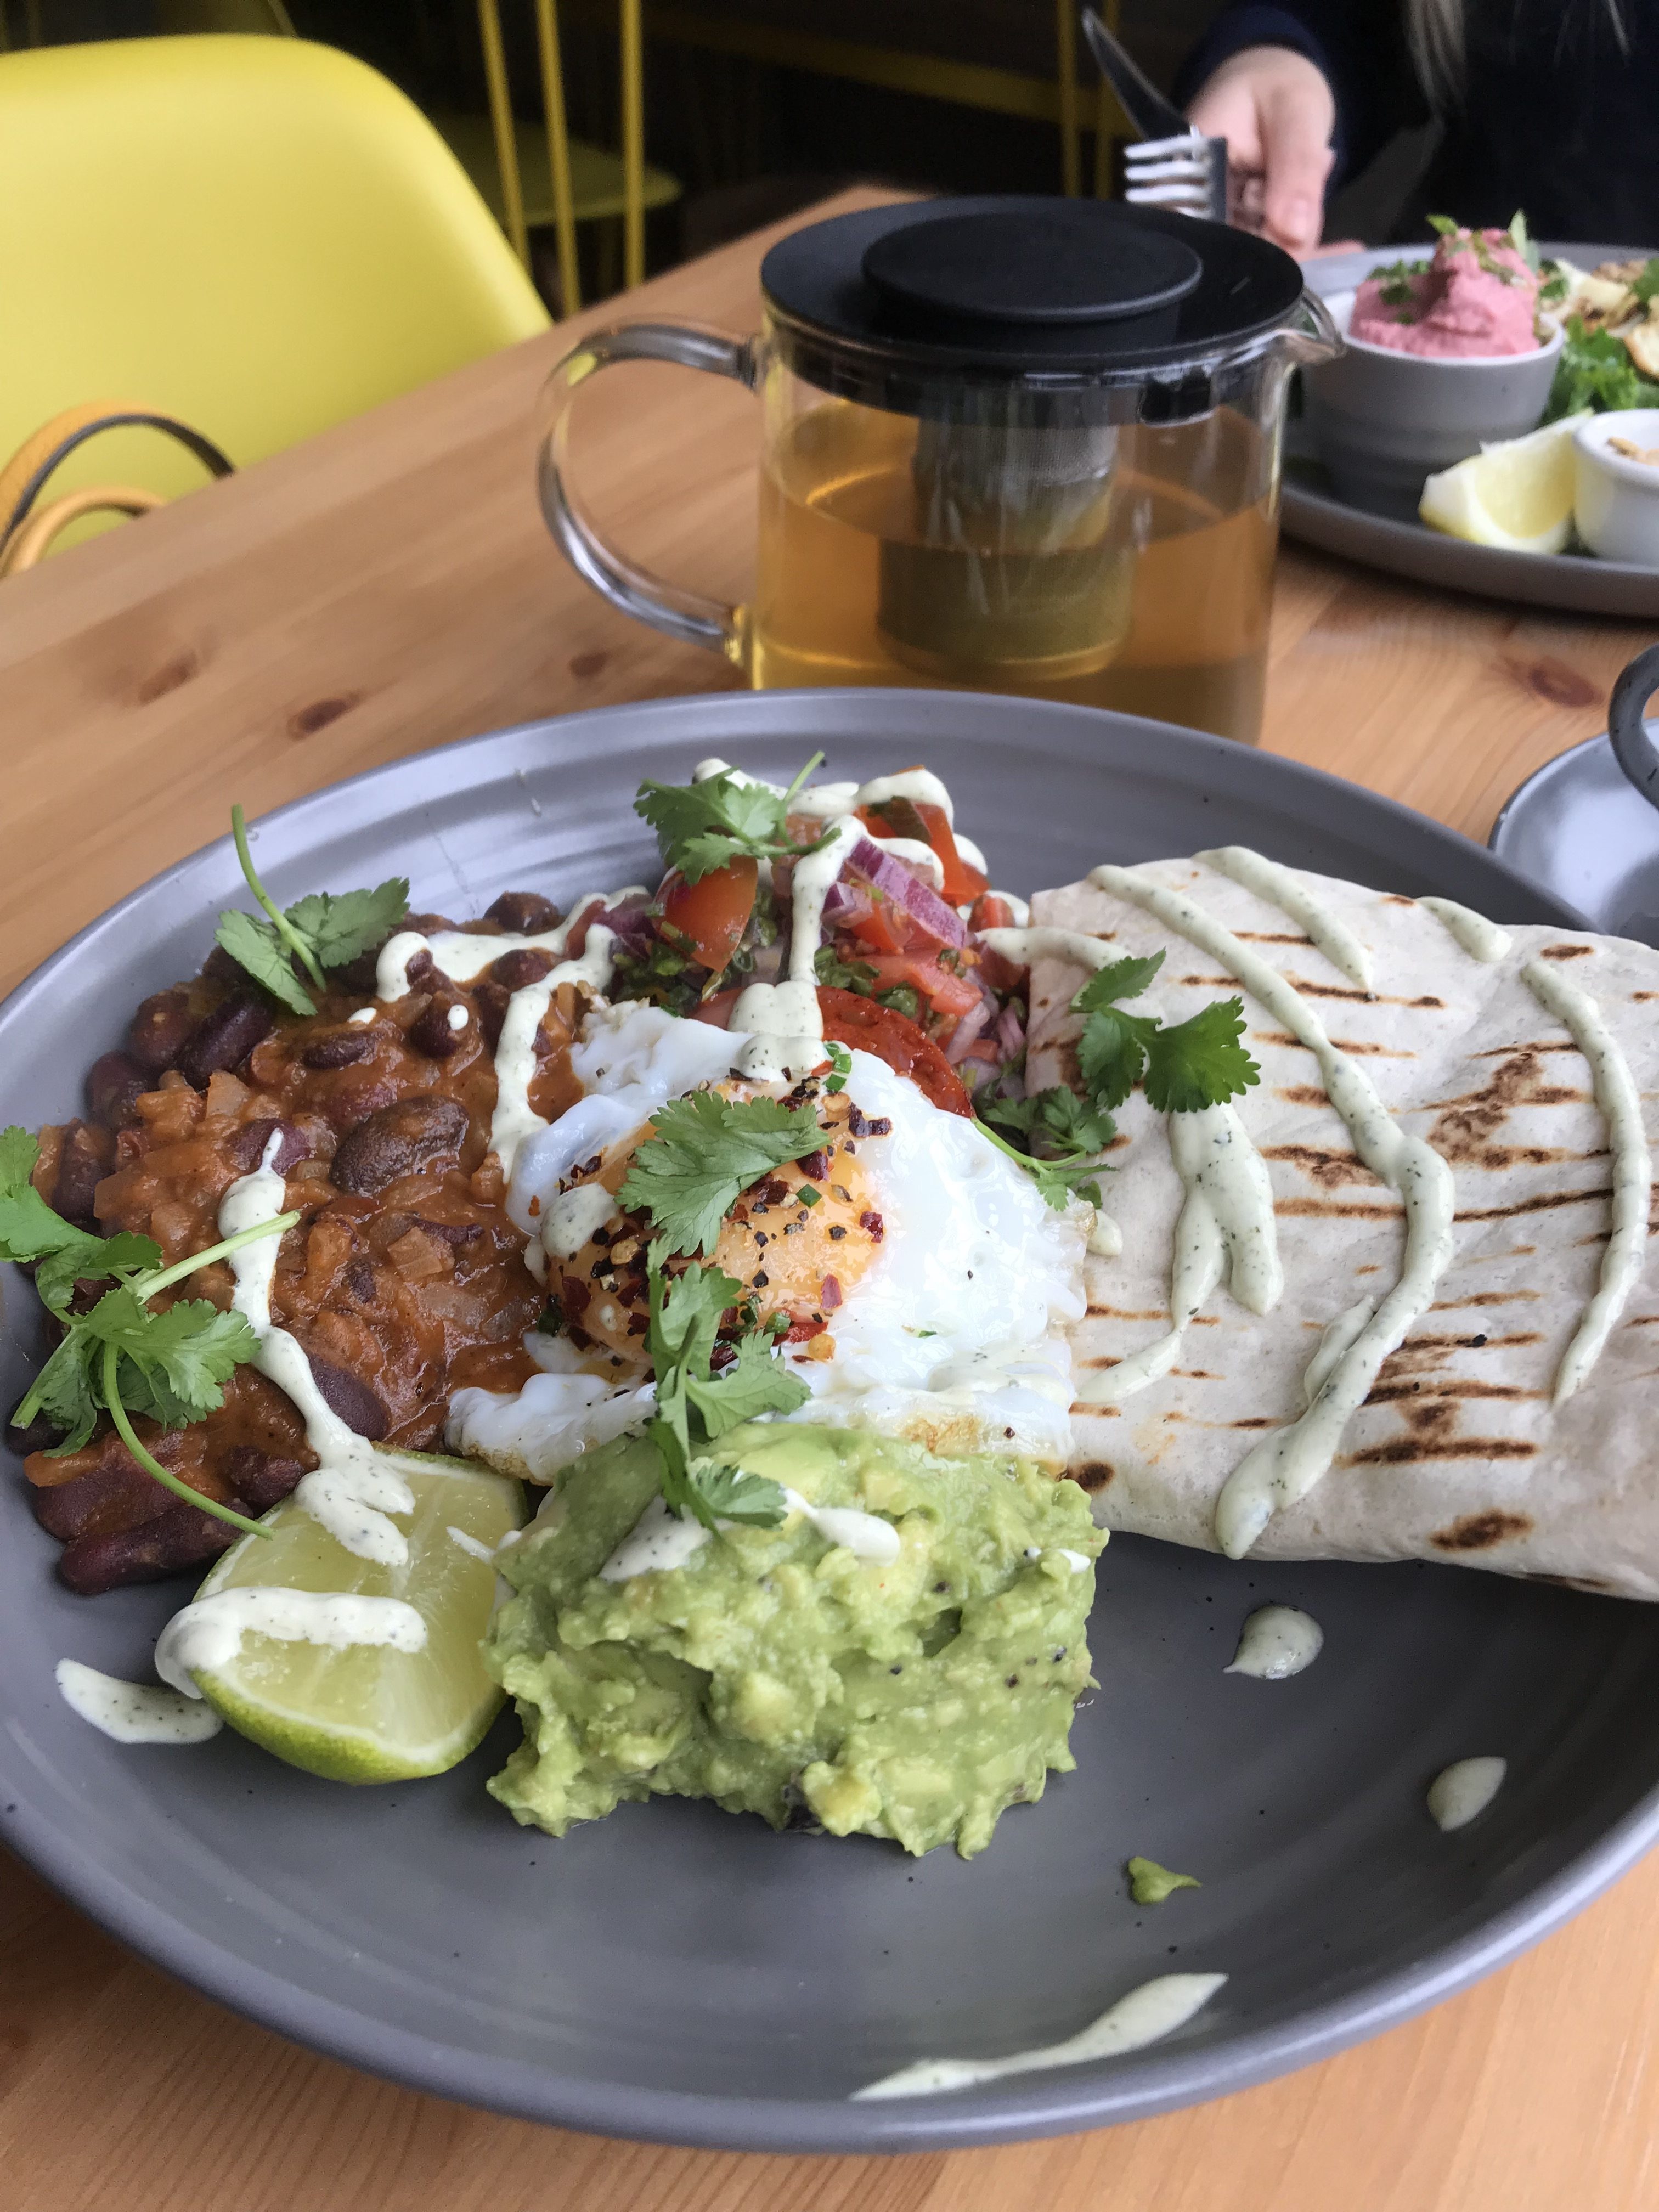 The Mexican | Where to go for Brunch in Newcastle & the Coast | Kith & Kin Independent Coffee Shop & Kitchen in Whitley Bay | Food Review | Elle Blonde Luxury Lifestyle Destination Blog